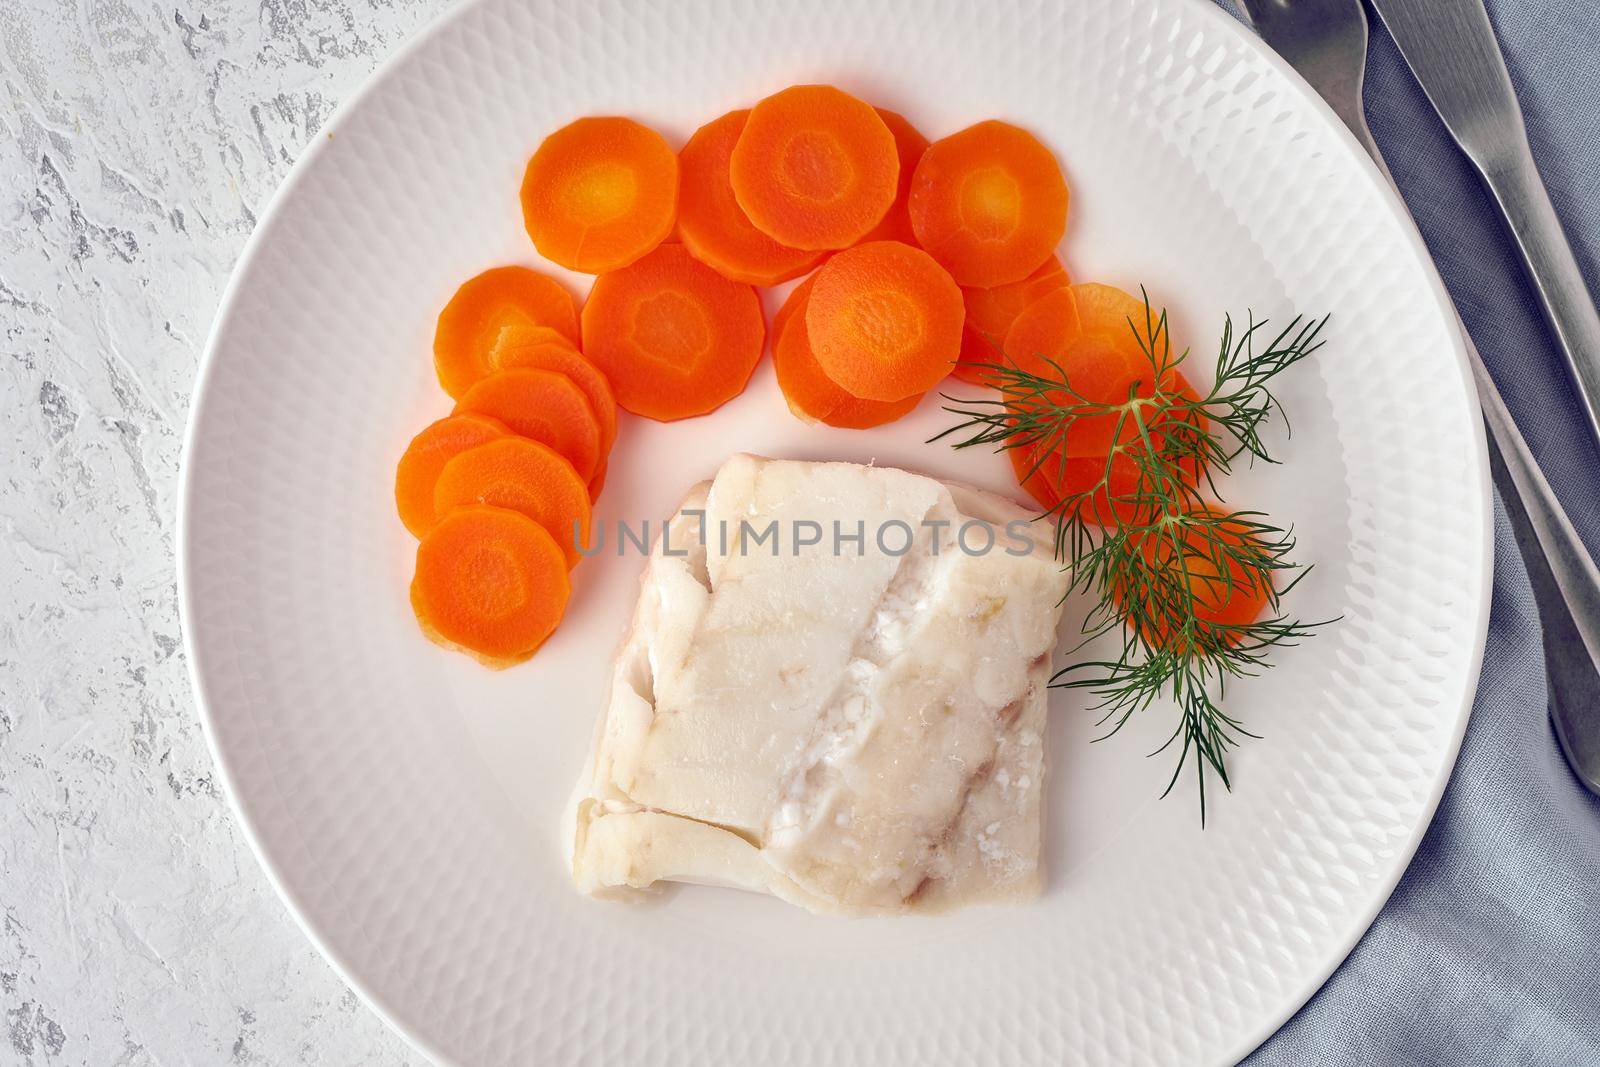 steamed codfish full of vitamins with carrot and dill, healthy diet, fodmap dash and paleo